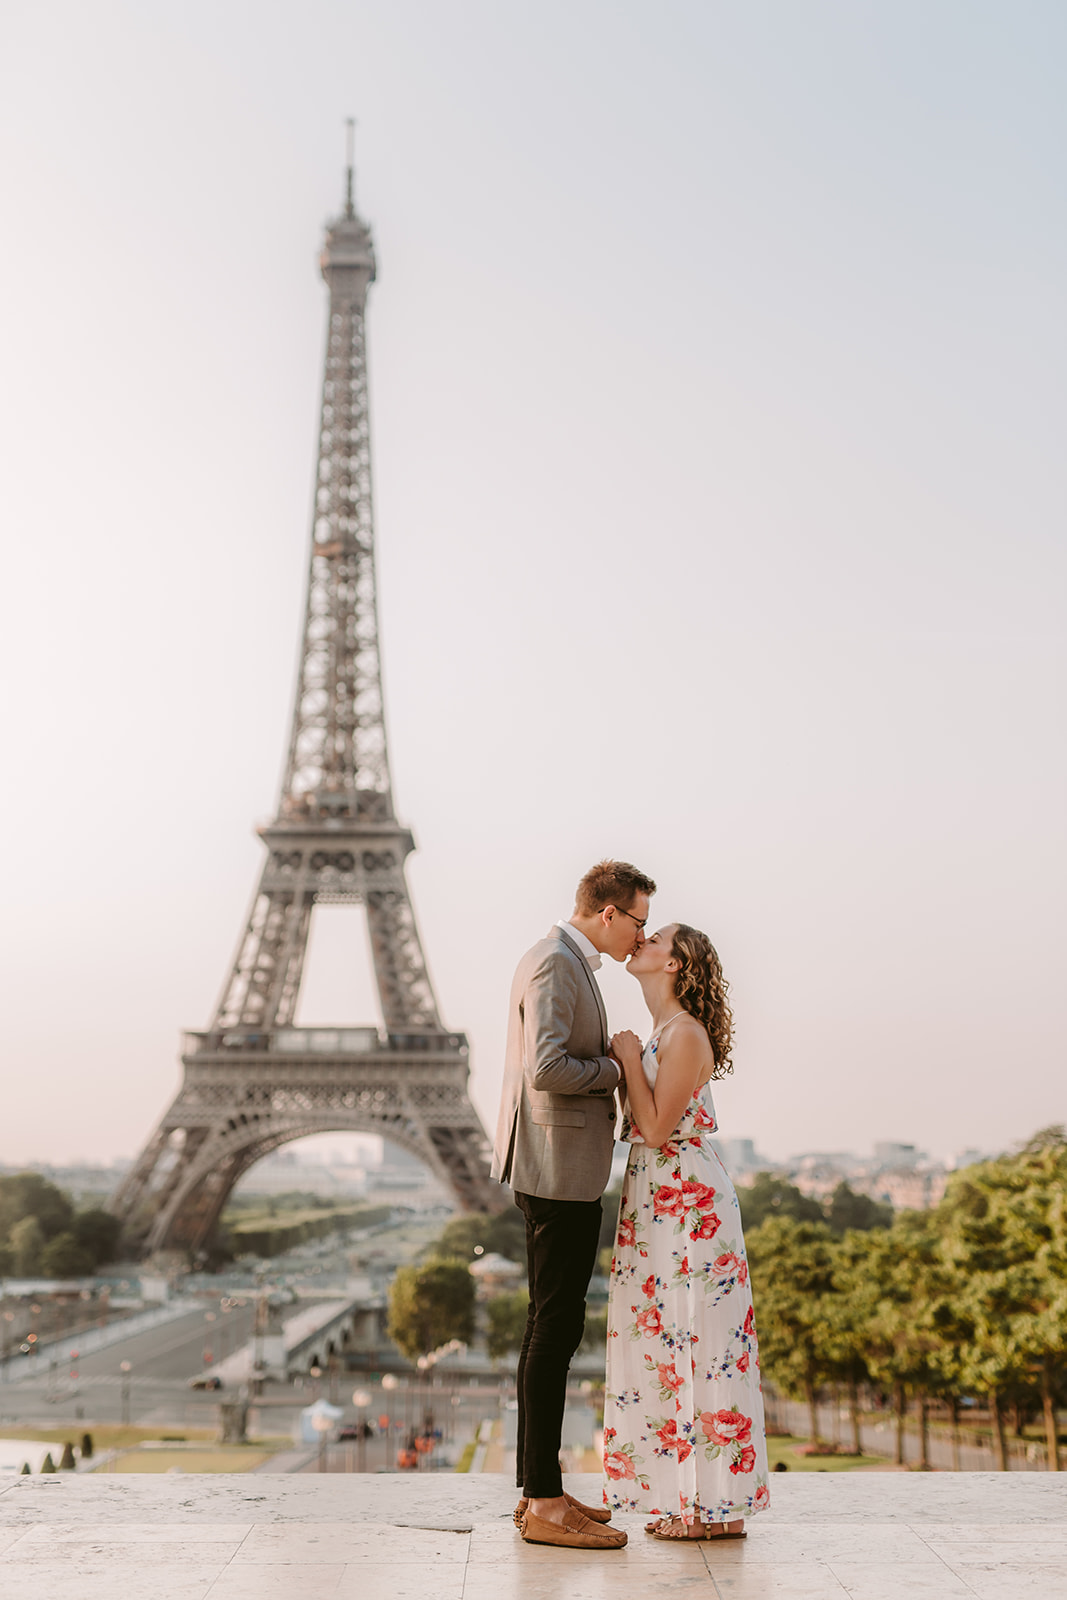 Couple kisses in front of the Eiffel Tower during their Wanderlust Engagement Session in Paris. Photo by Victoria Heer, luxury wedding photographer.